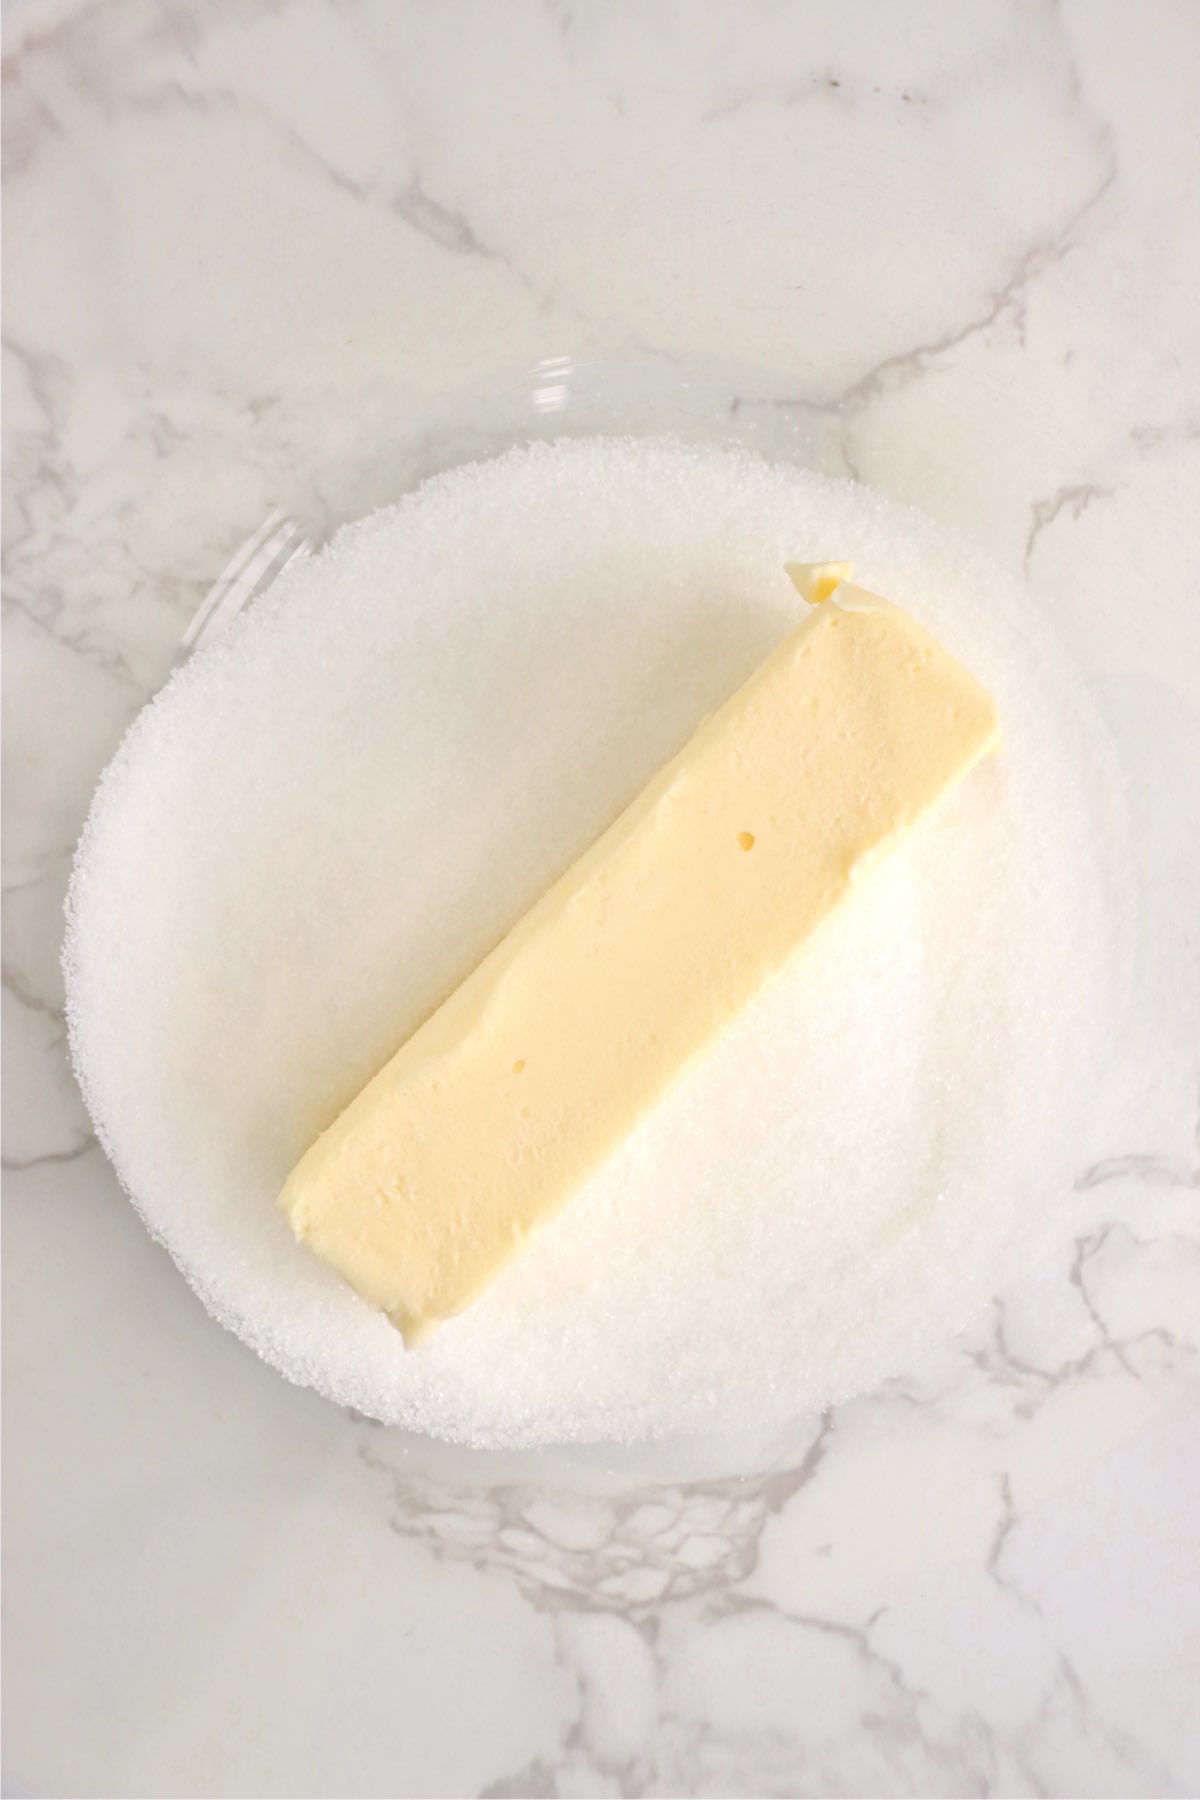 Stick of butter and sugar in a mixing bowl